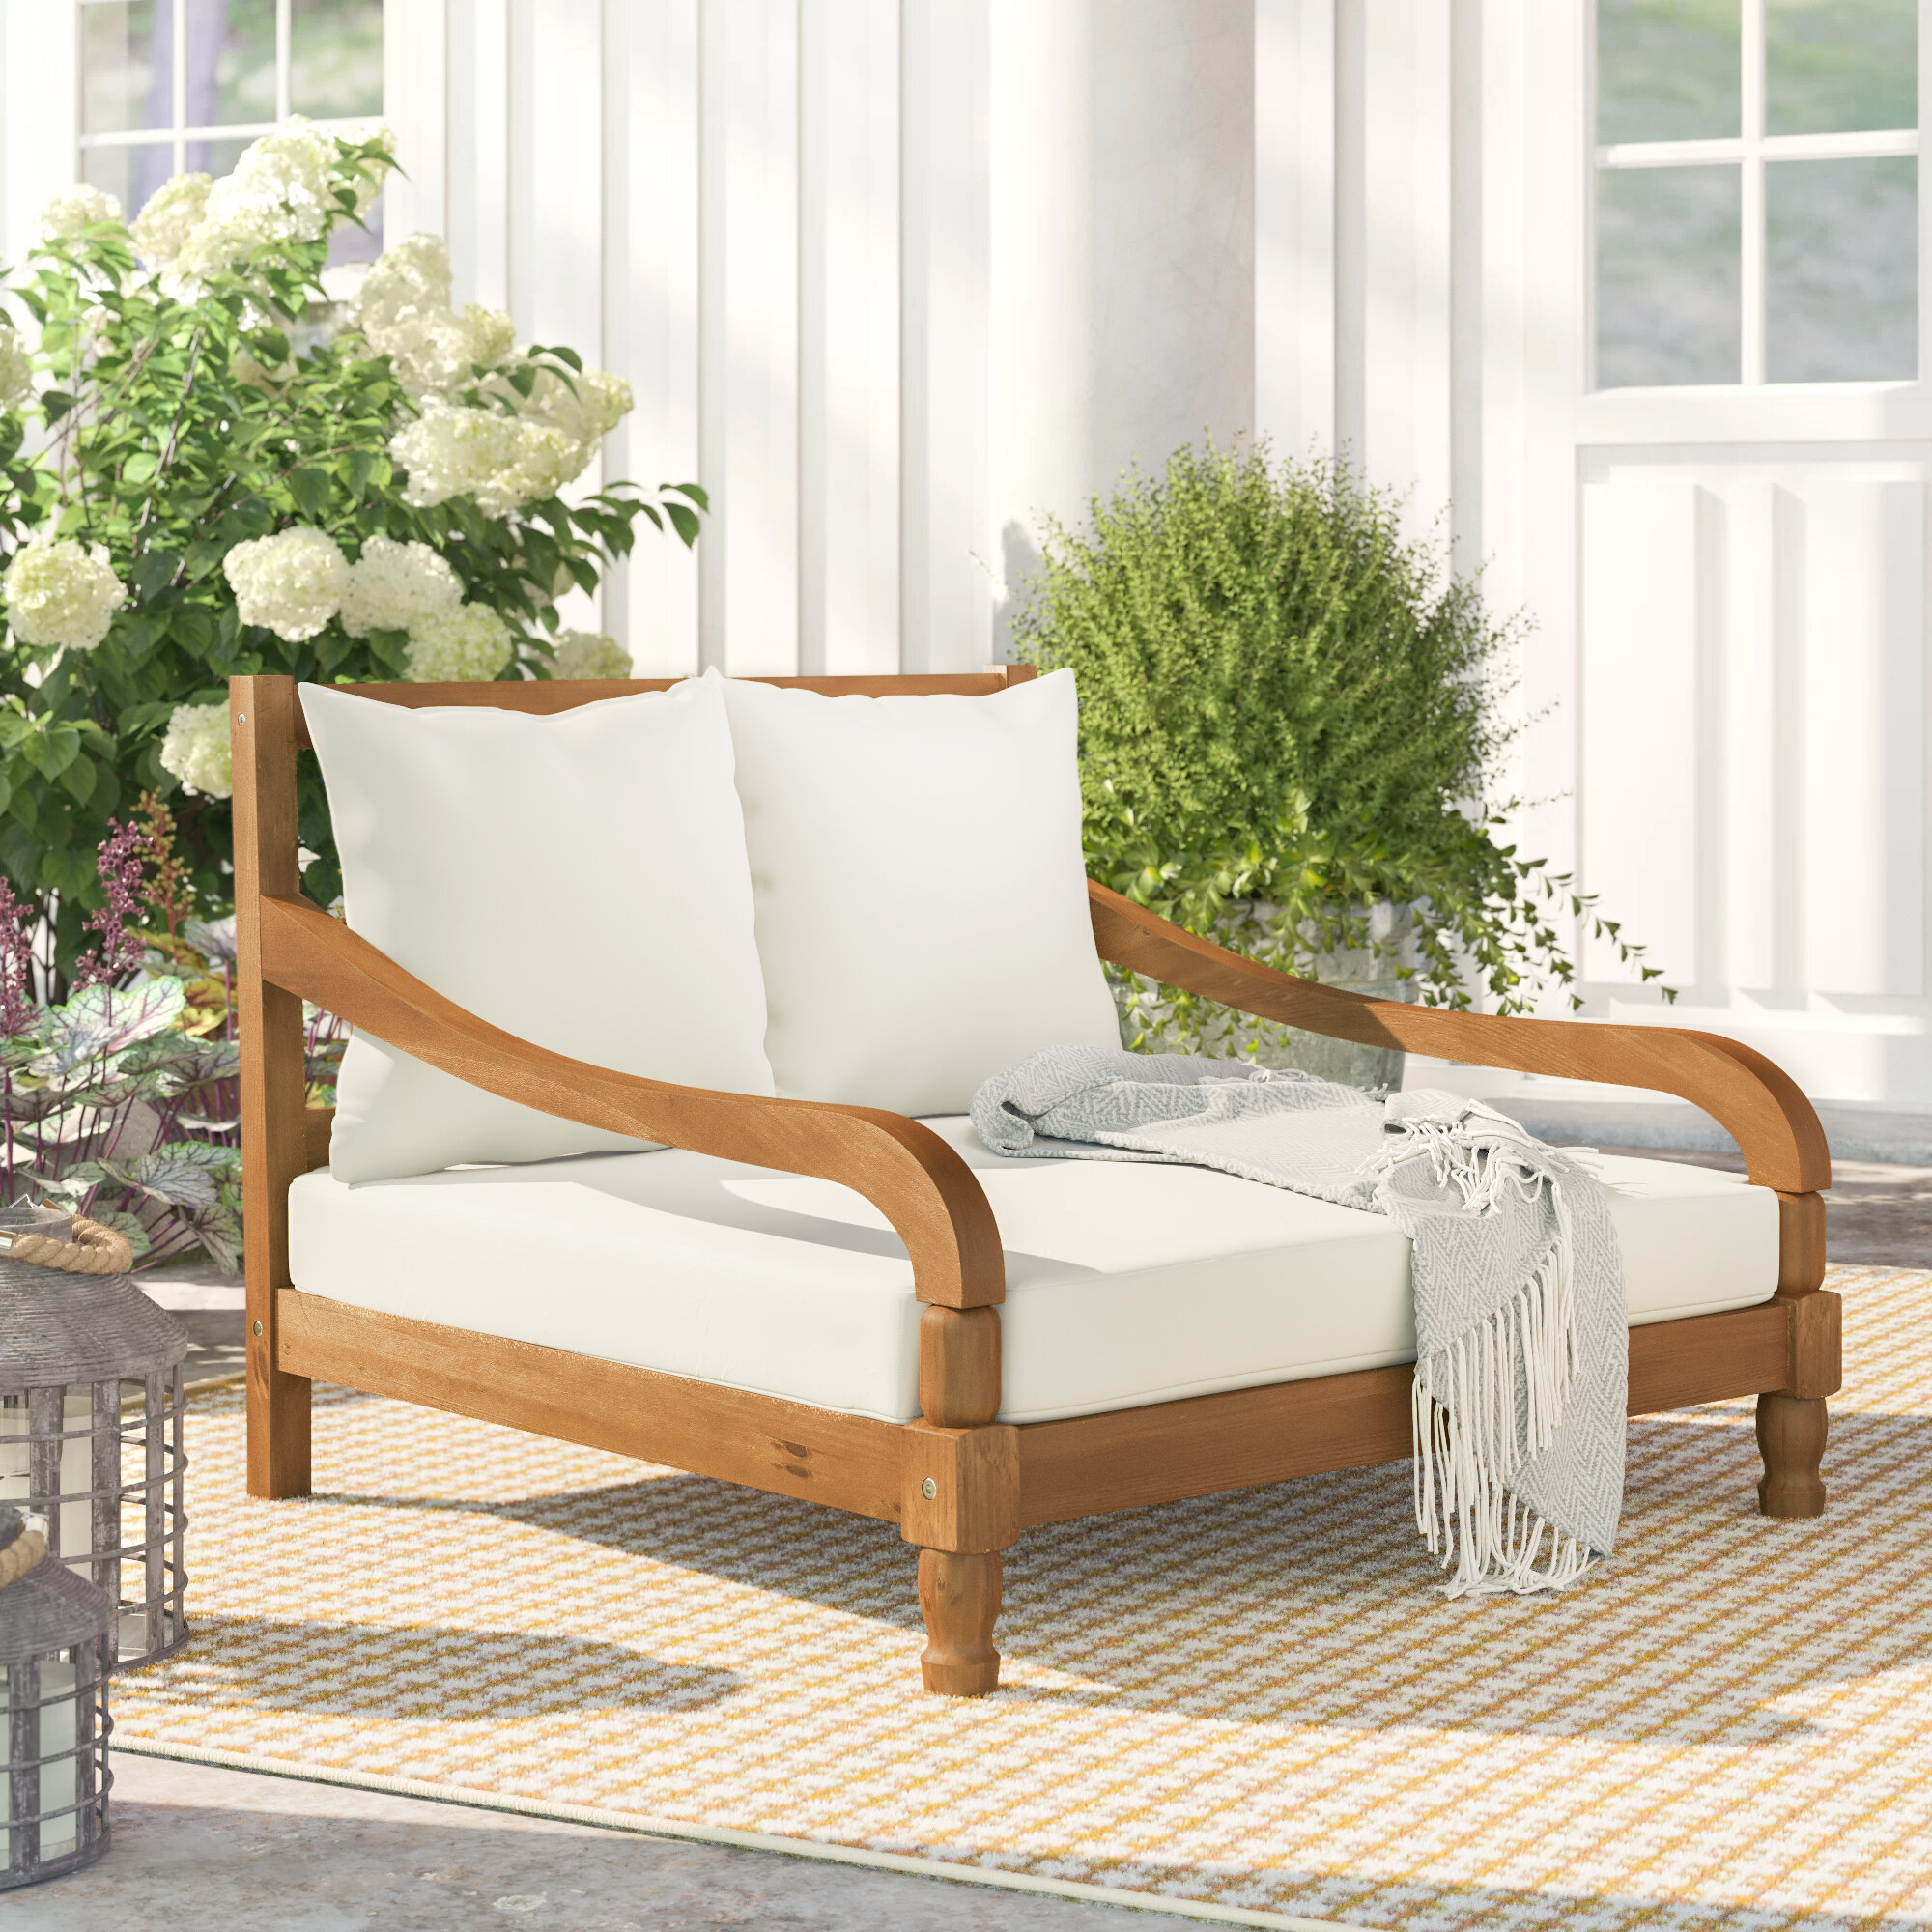 lowes patio chaise lounge